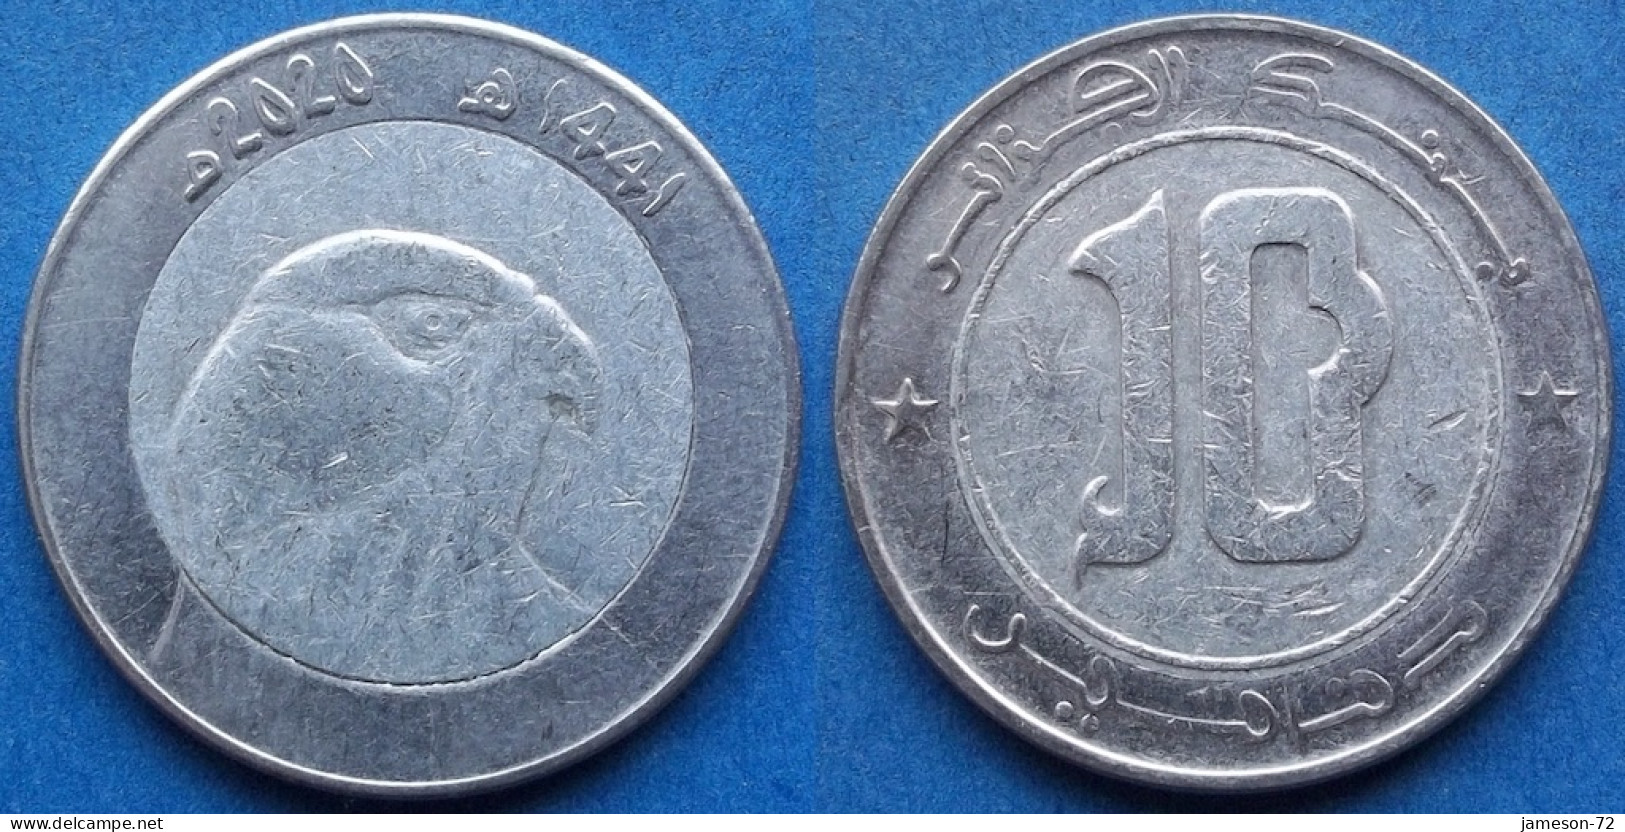 ALGERIA - 10 Dinars AH1441 2020AD "Barbary Falcon" KM# 124 Independent (1962) - Edelweiss Coins - Algerije